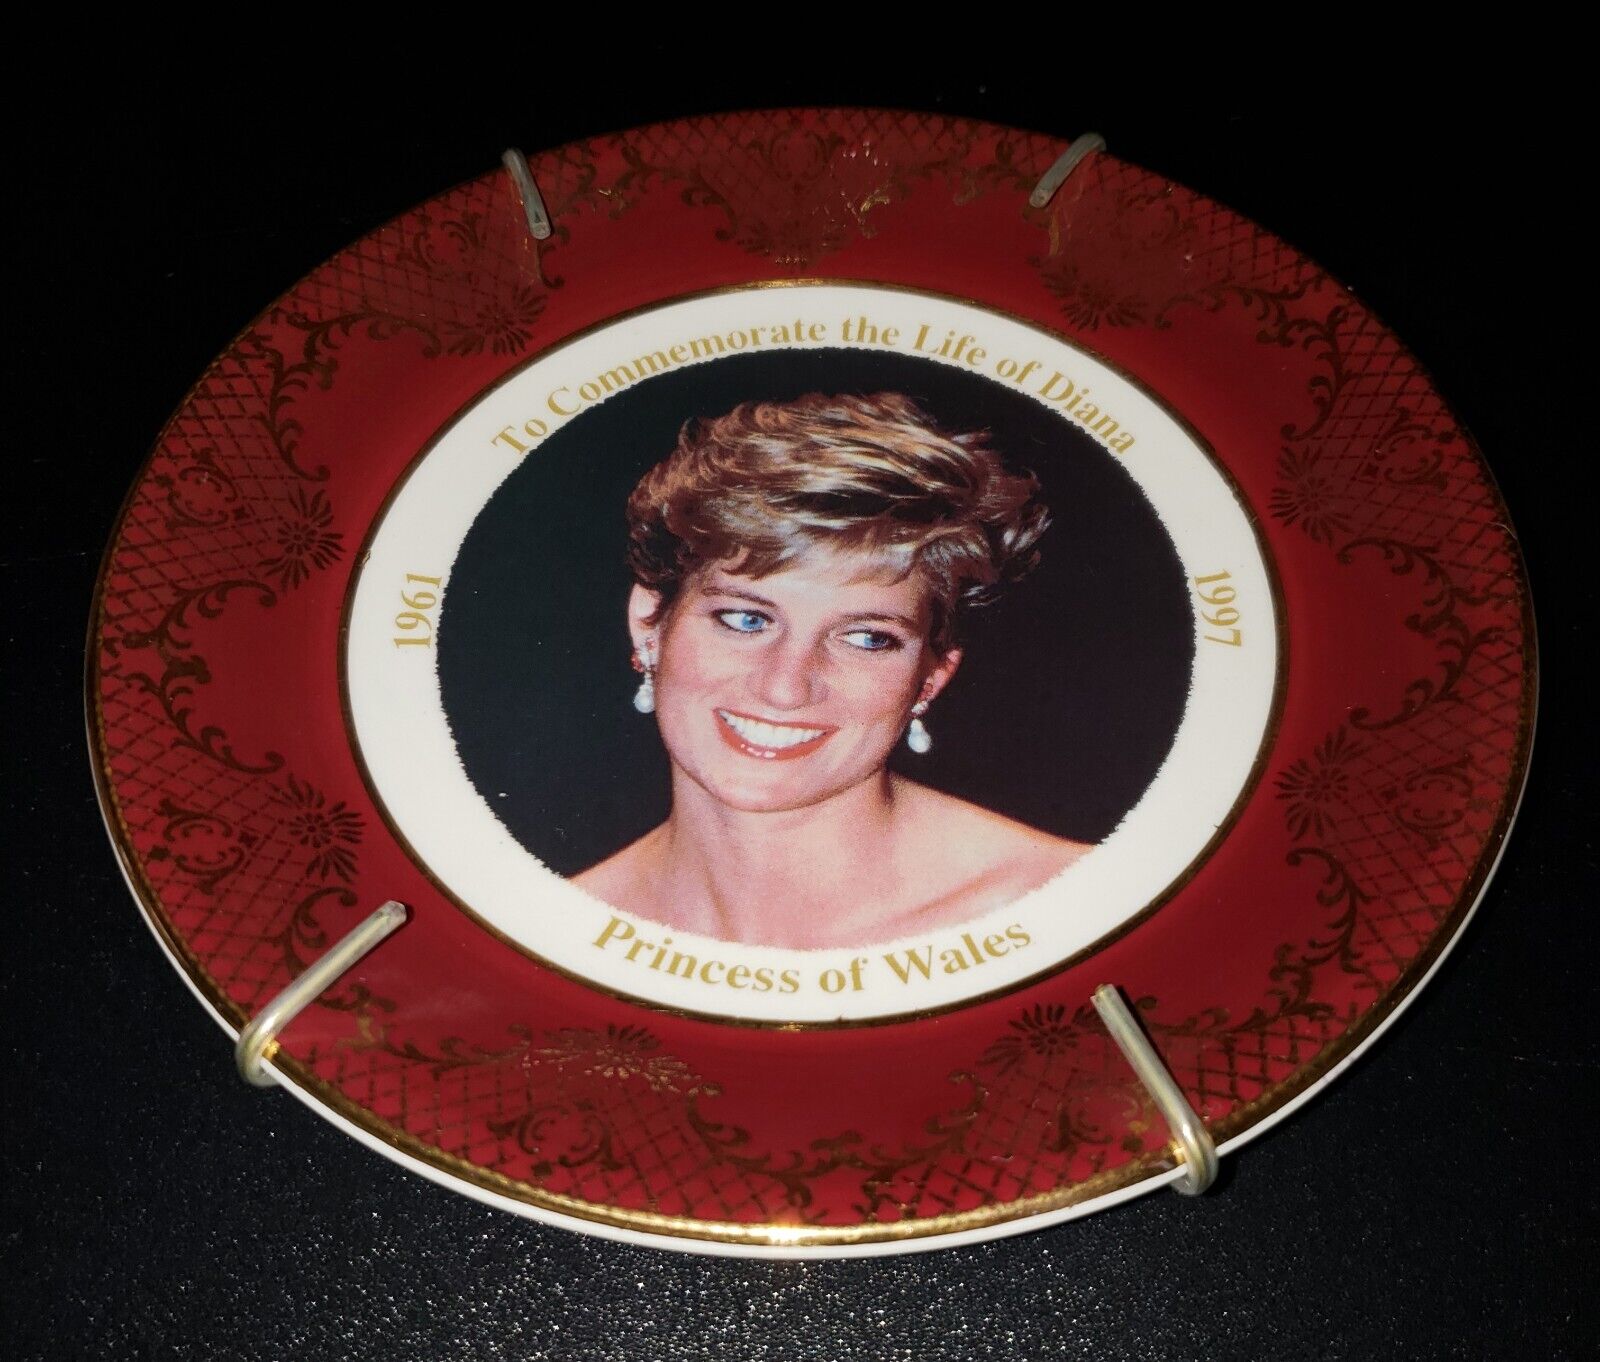 Princess Diana of Wales Collector's #87 commemorative plate